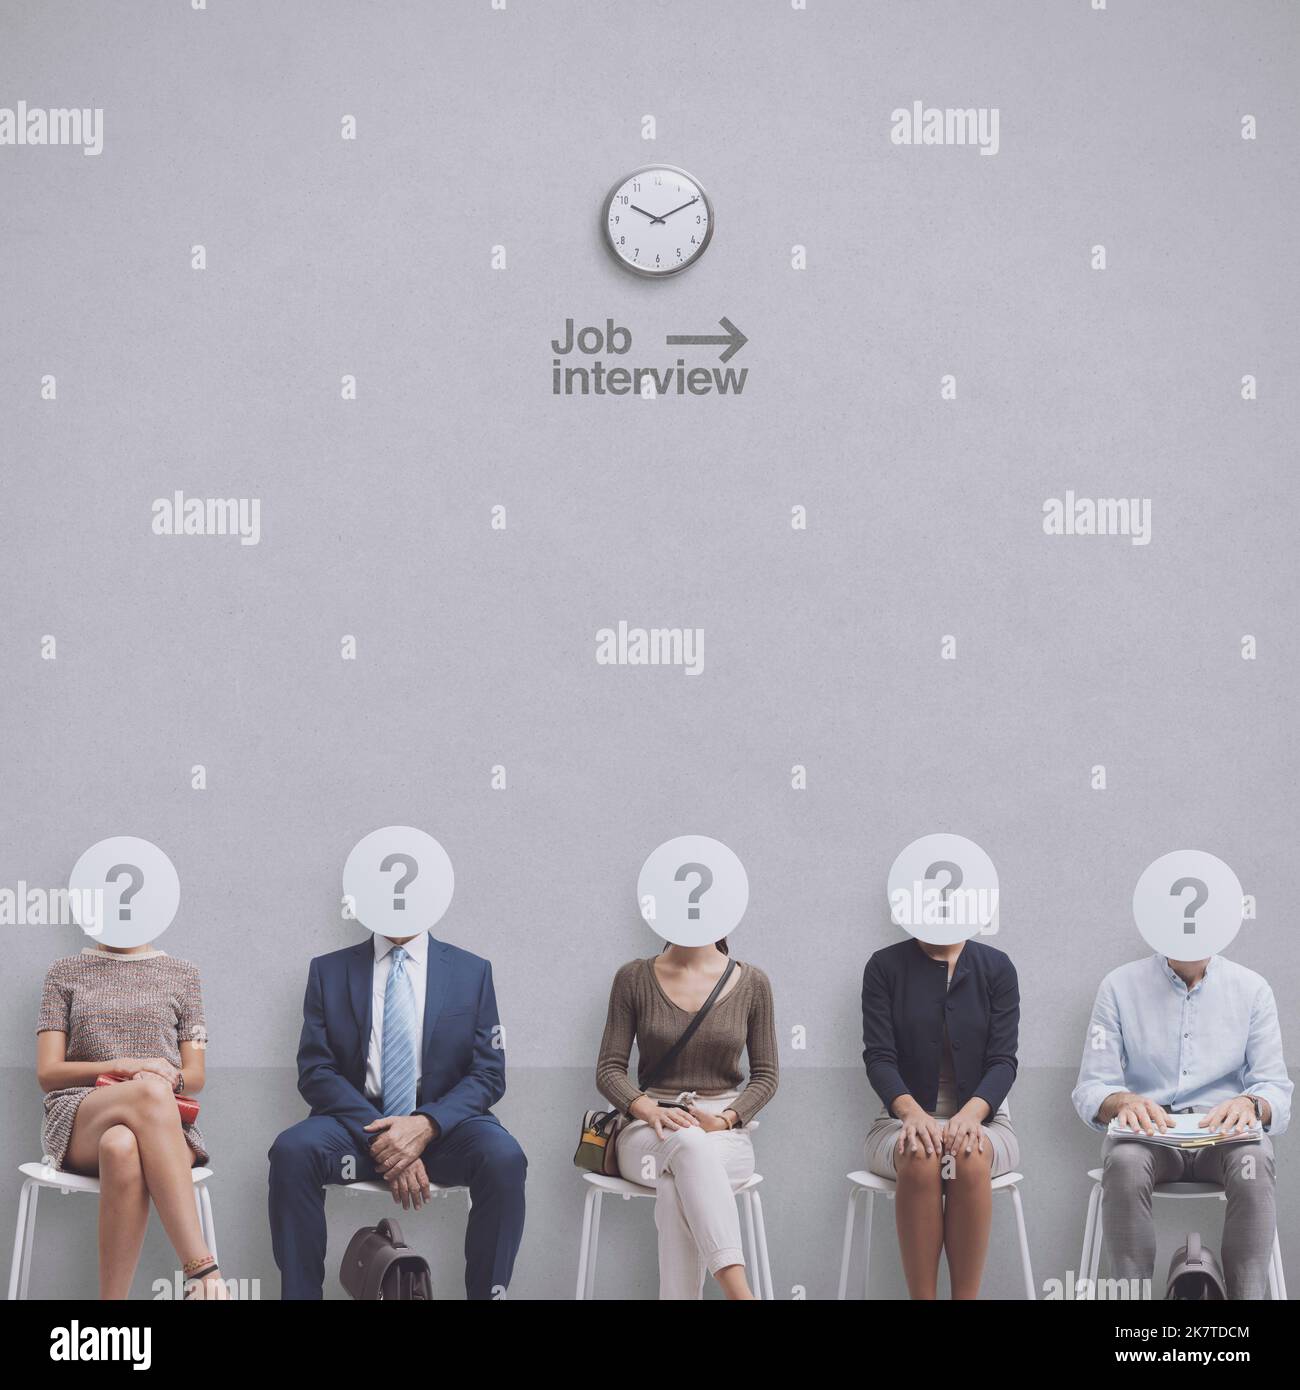 Diverse job candidates sitting in the waiting room and waiting for their turn, they have question marks in place of their heads Stock Photo